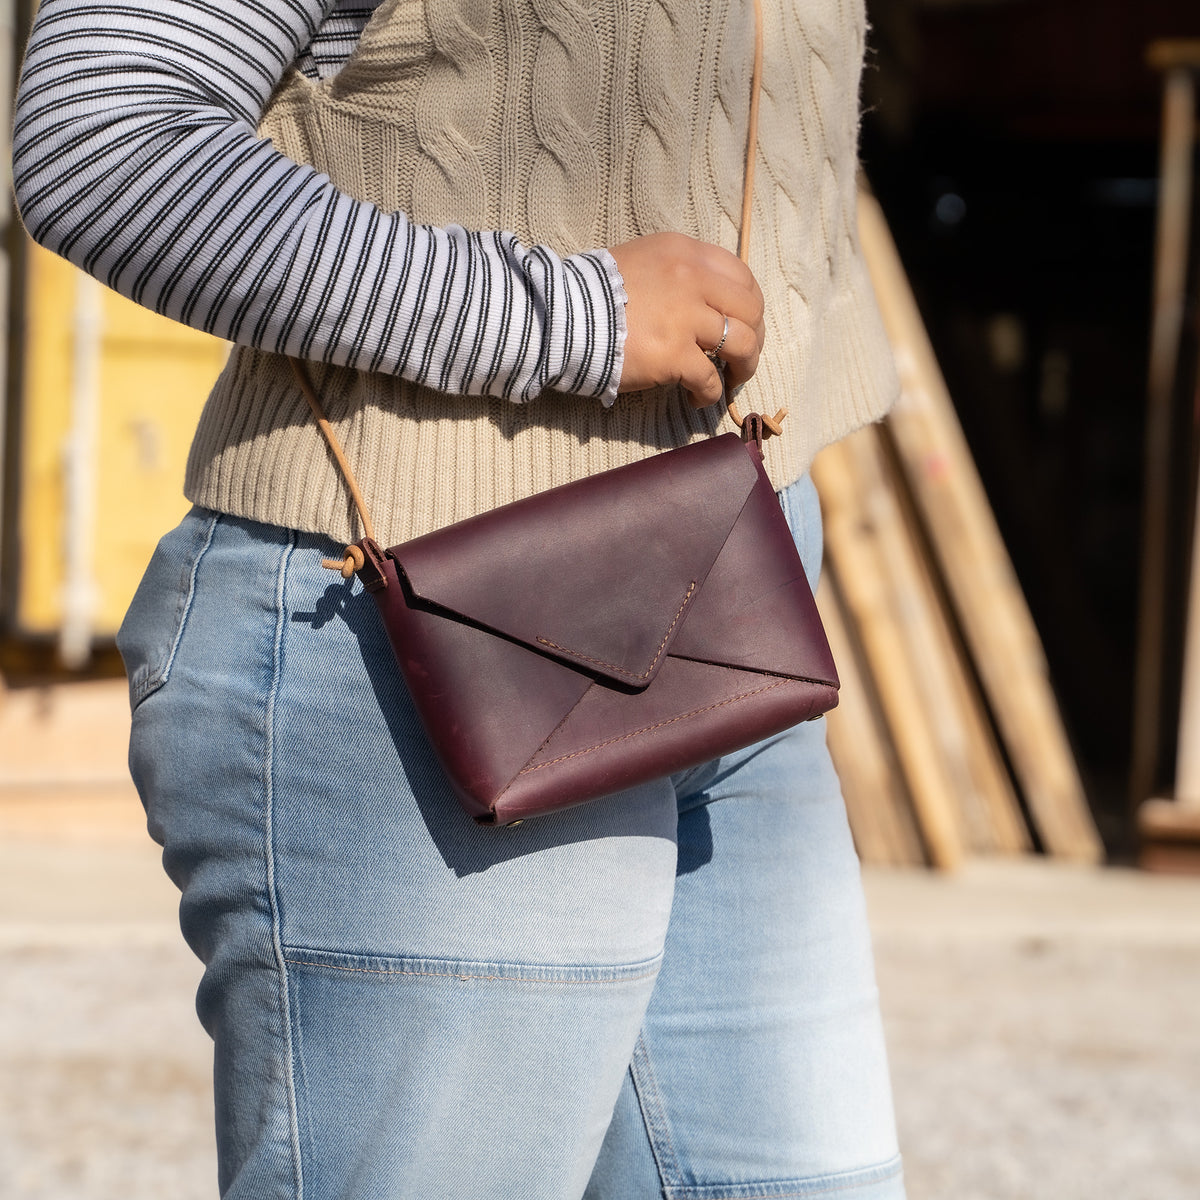 Personalized Leather Envelope Purse Handbag - Made in USA The Cecilia, Redat Holtz Leather